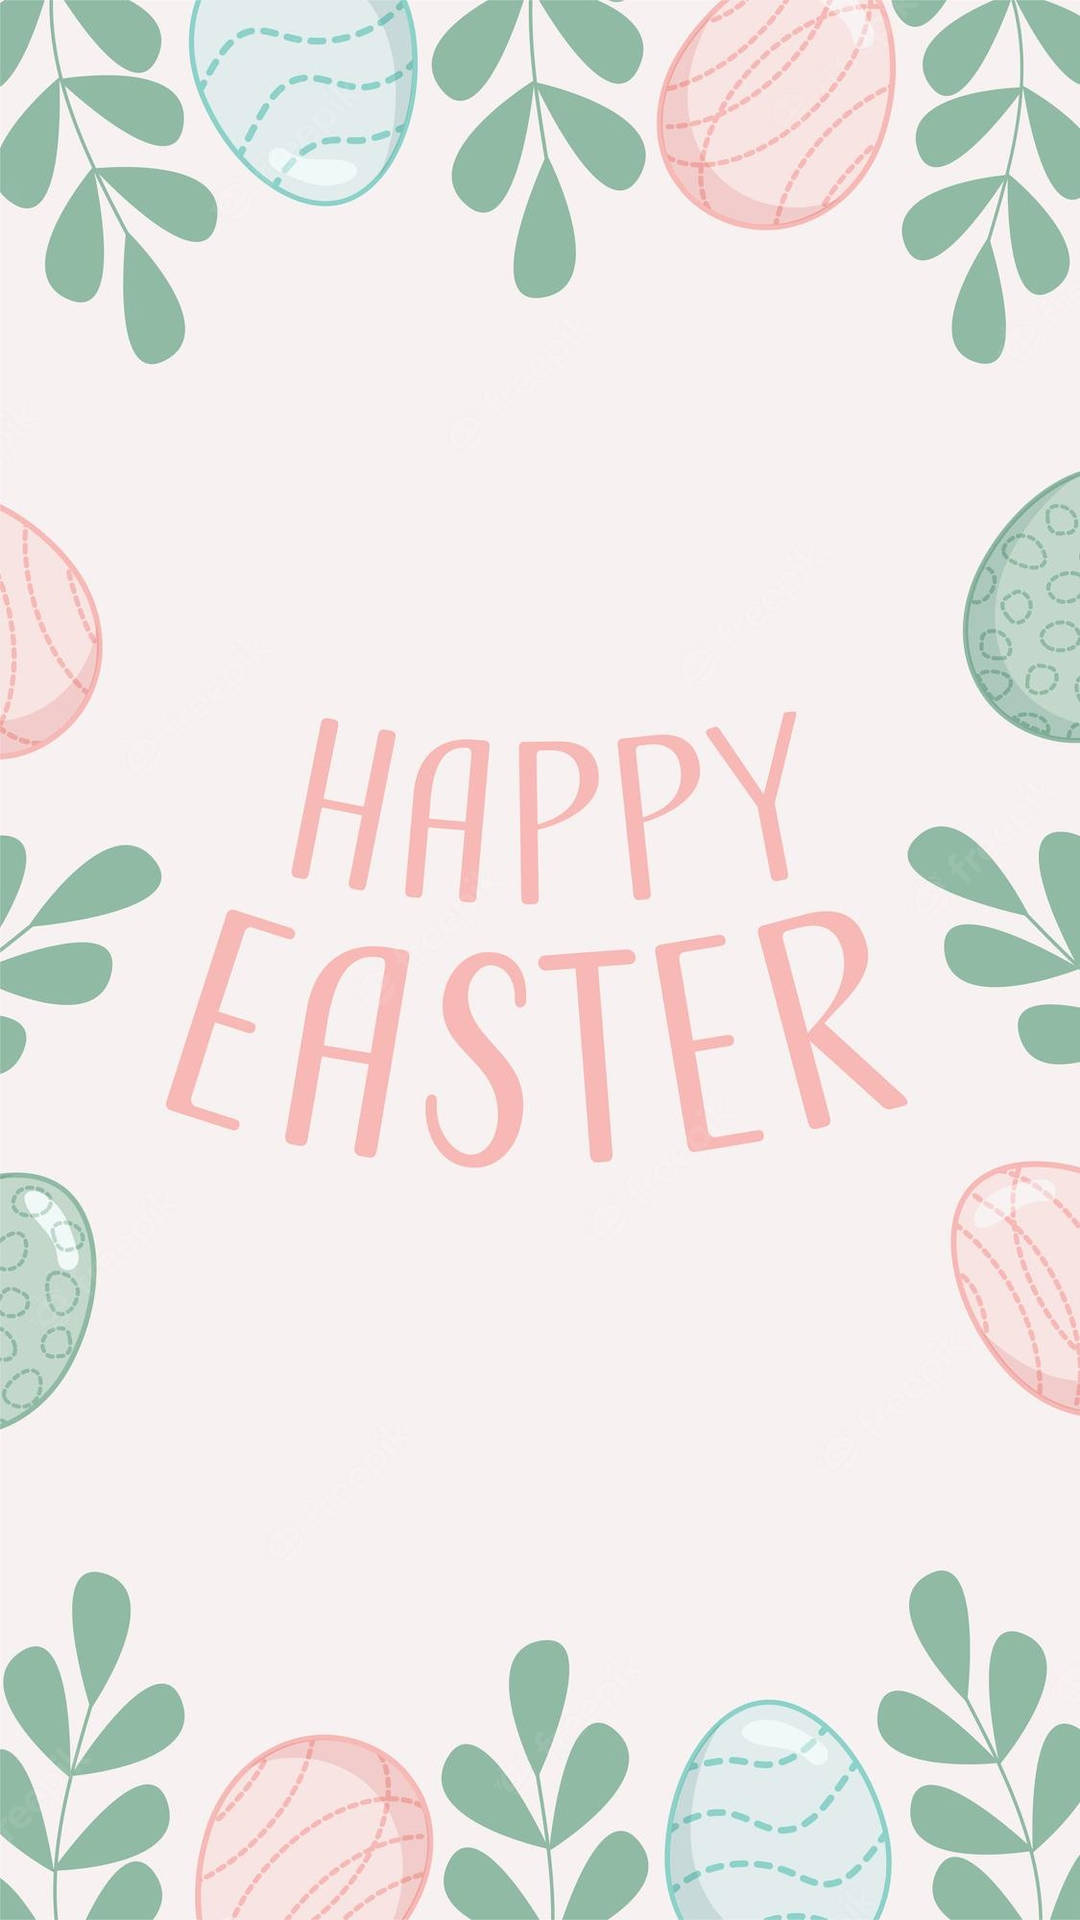 Happy Easter Wishes! Wallpaper